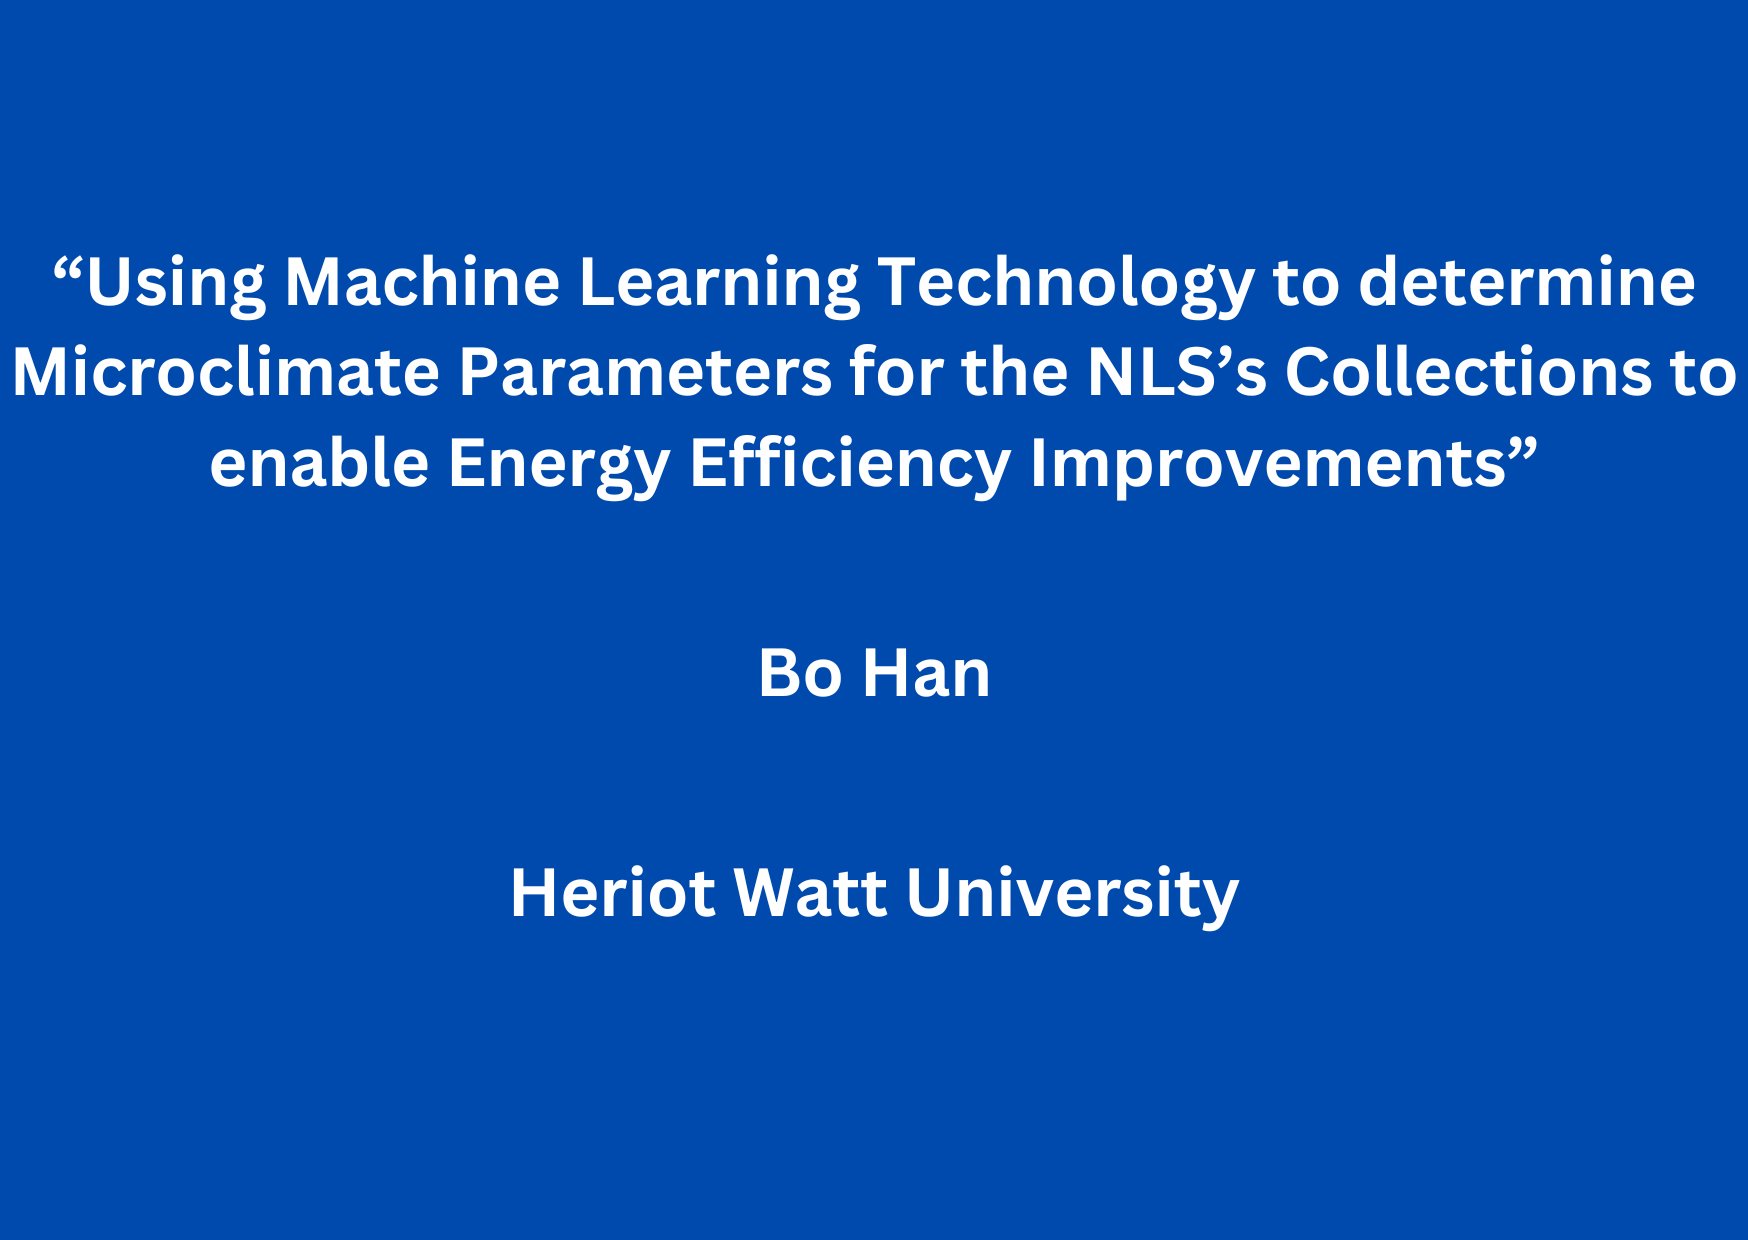 AEOLIAN Workshop 6: “Using Machine Learning Technology to determine Microclimate Parameters for the NLS’s Collections to enable Energy Efficiency Improvements” by Bo Han